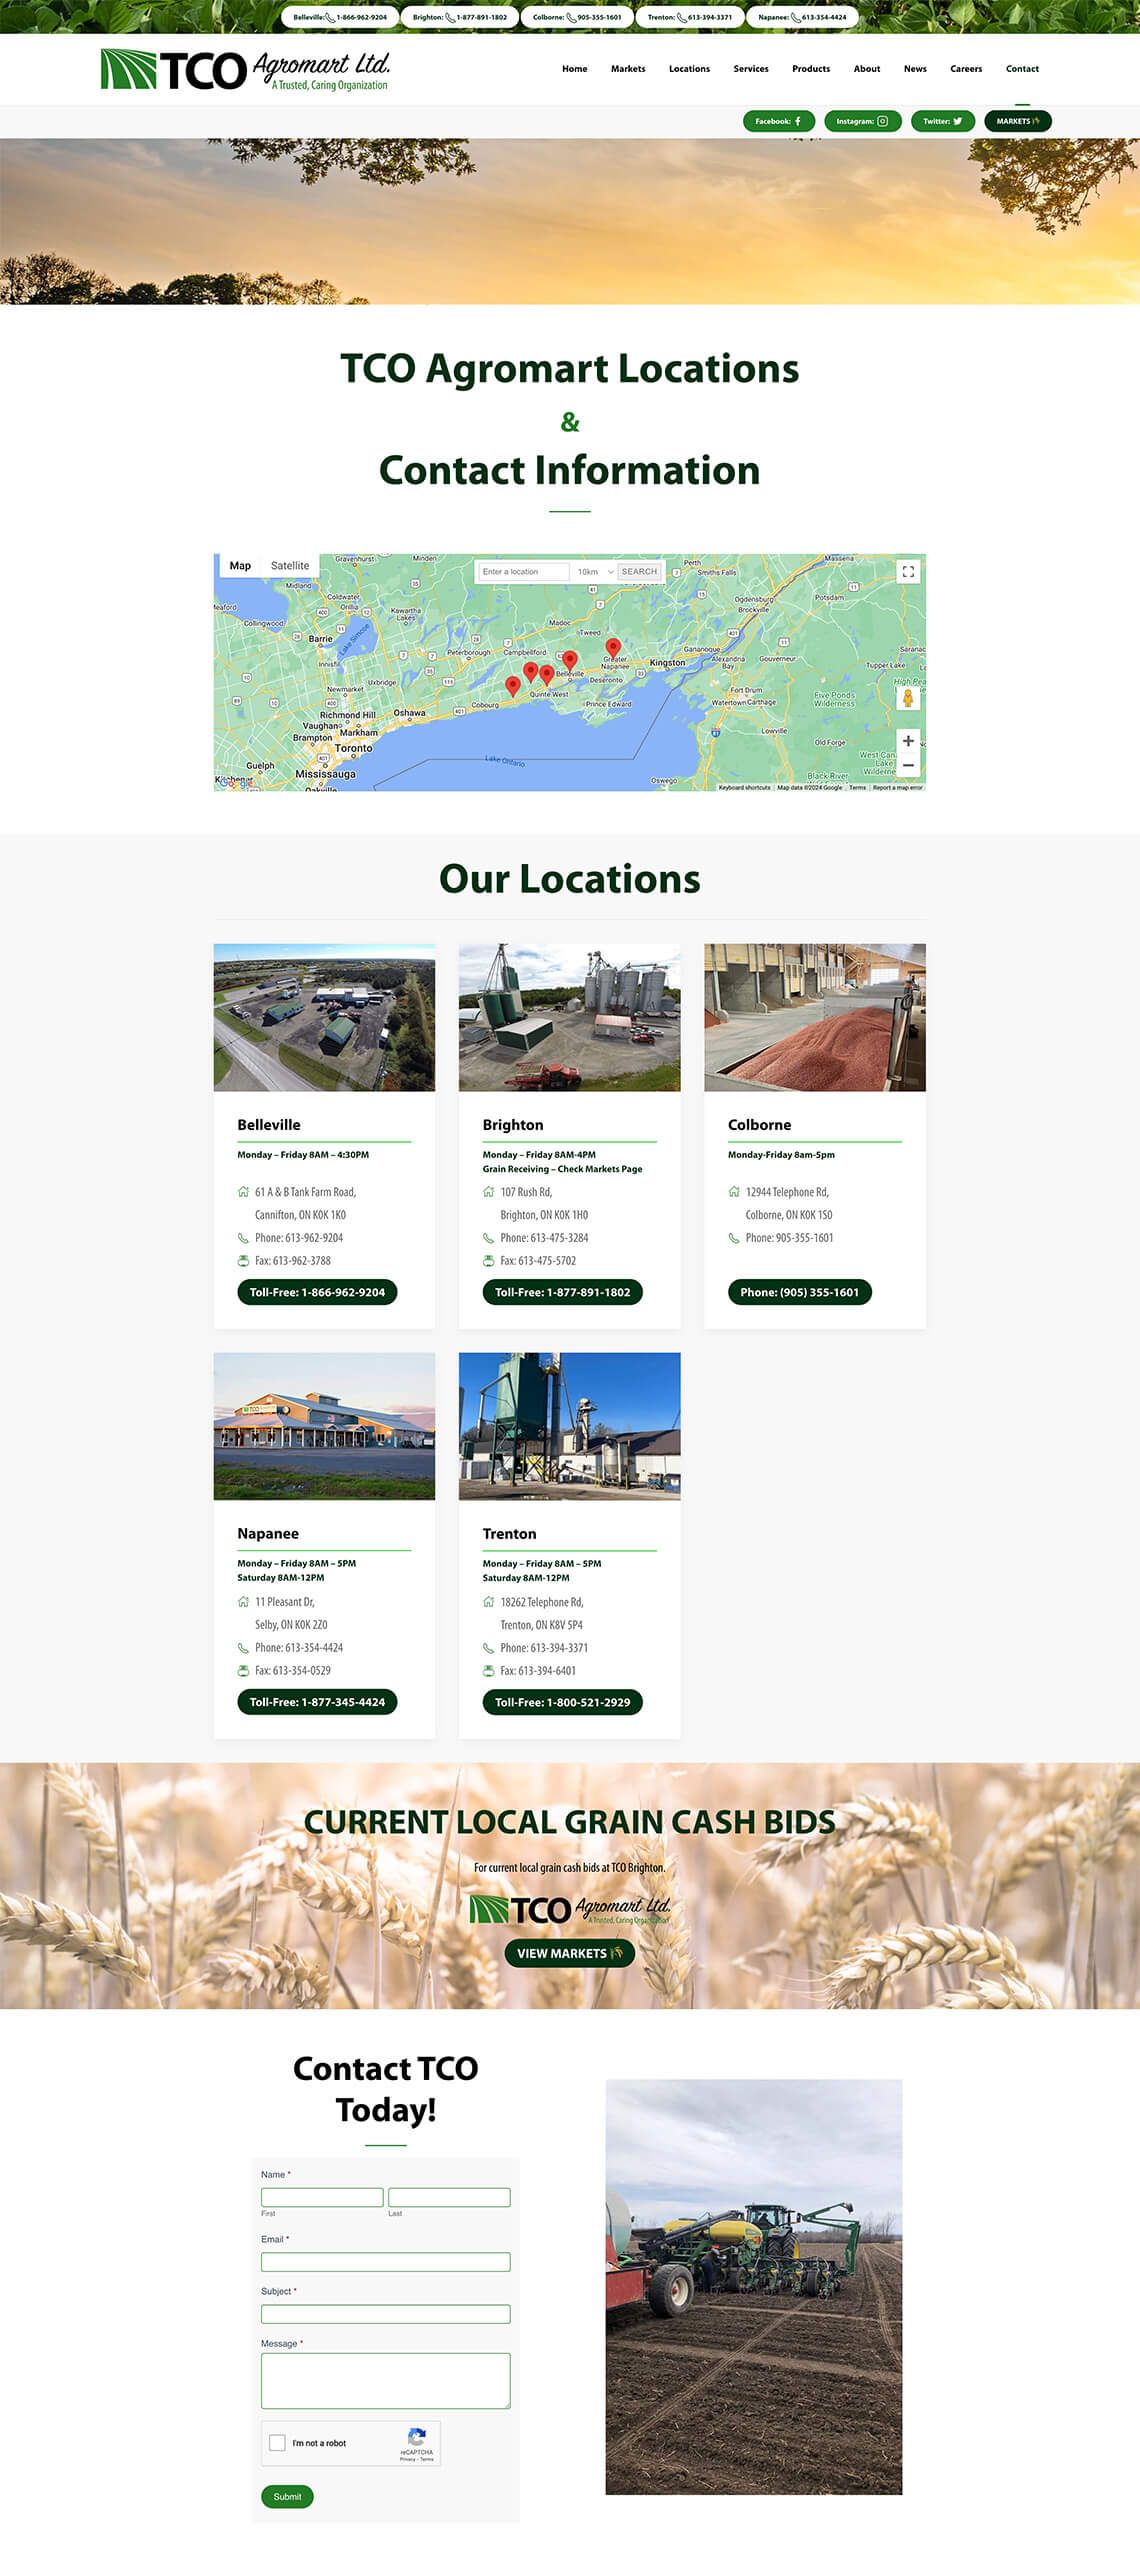 TCO Agromart Contact Page screenshot